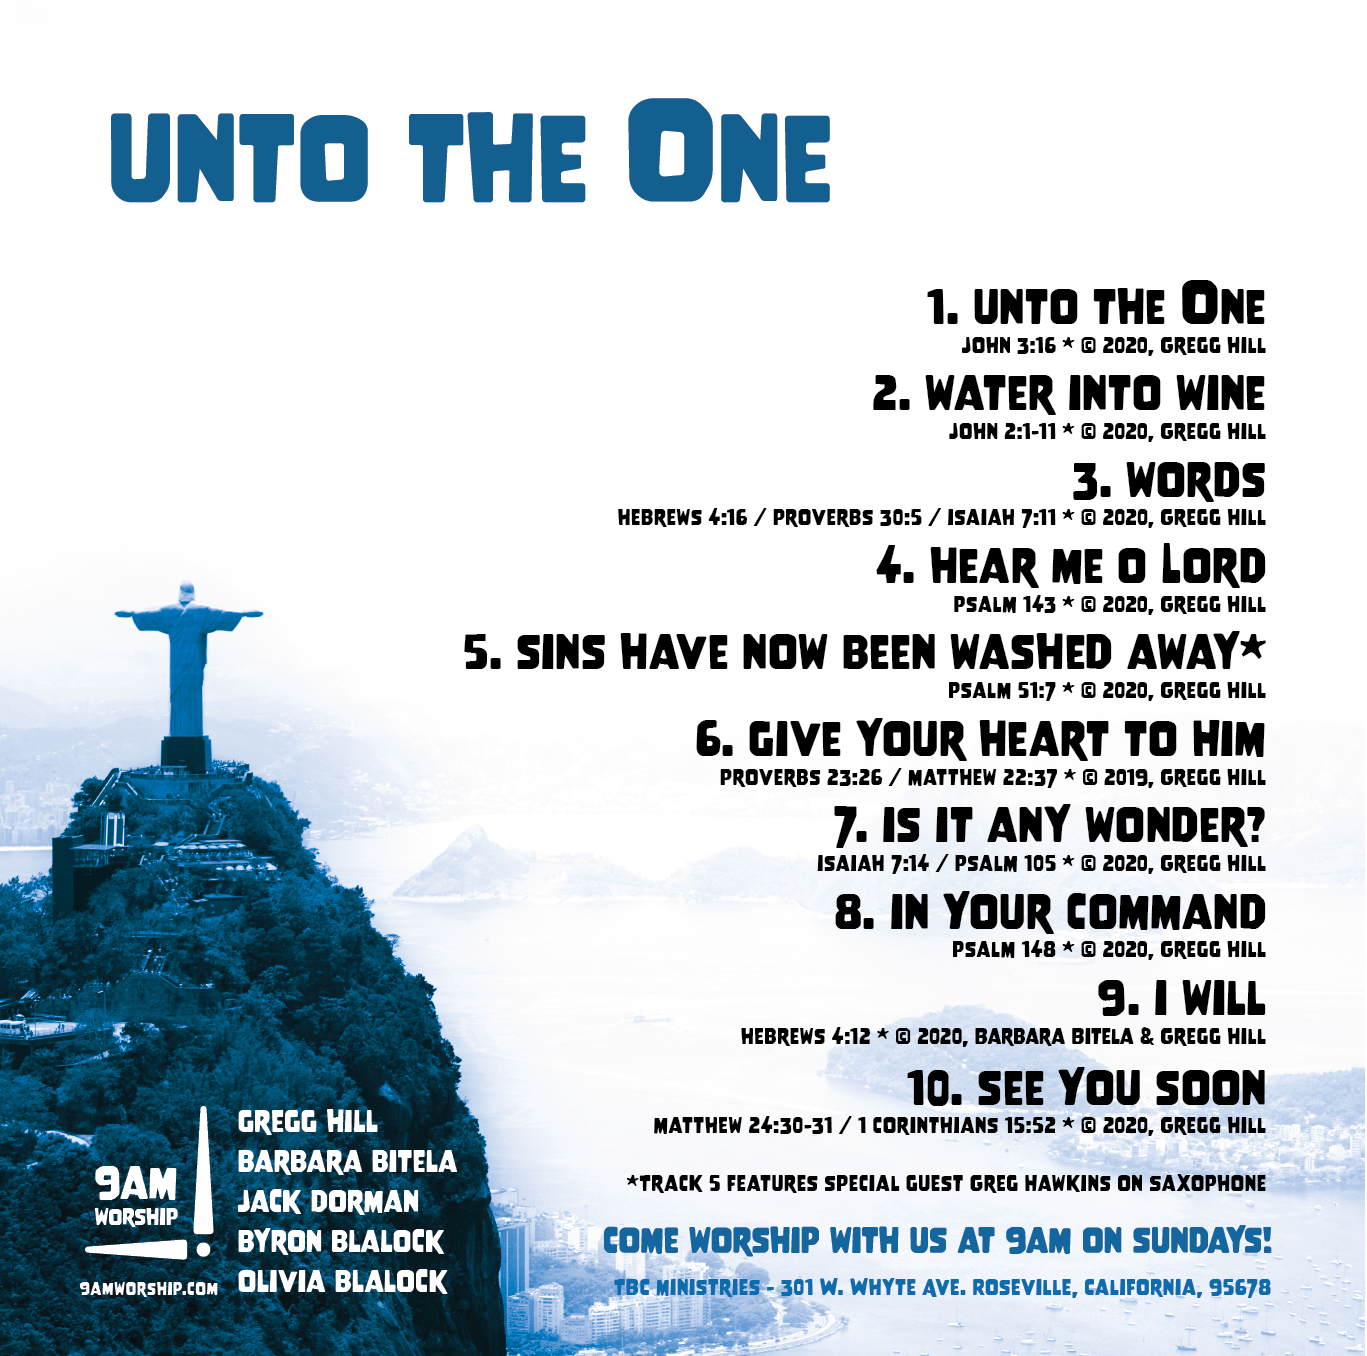 Album insert for "unto the One" by 9am worship